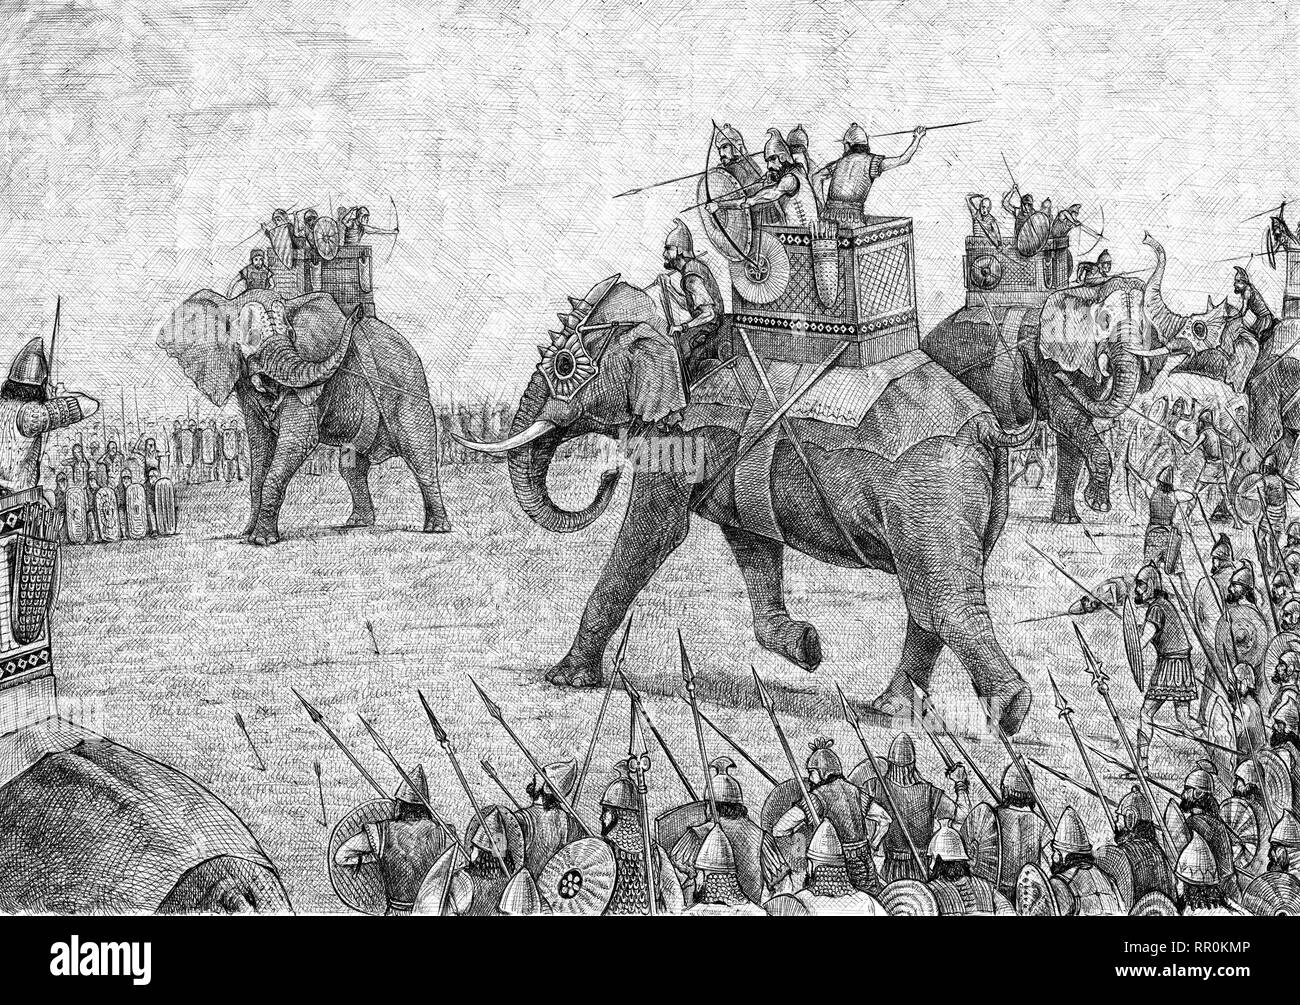 War elephant illustration, army of Carthage. Ancient battle drawing. Stock Photo